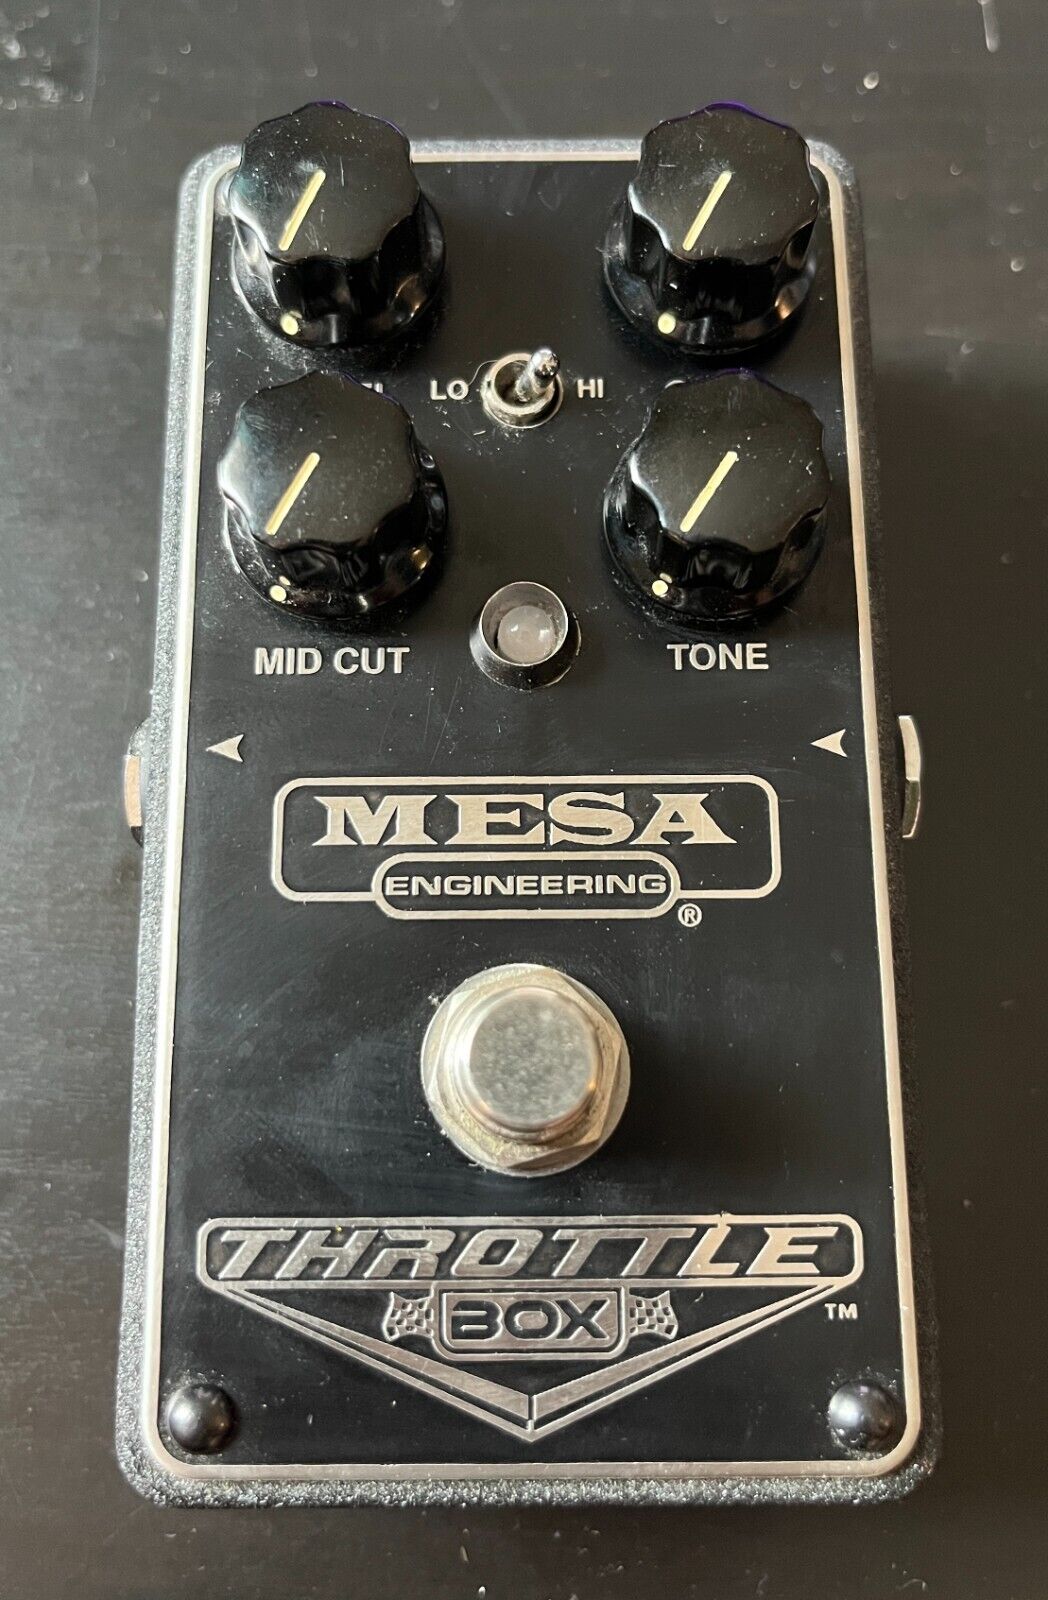 Mesa Engineering Throttle Box Distortion Guitar Effects Pedal and power supply